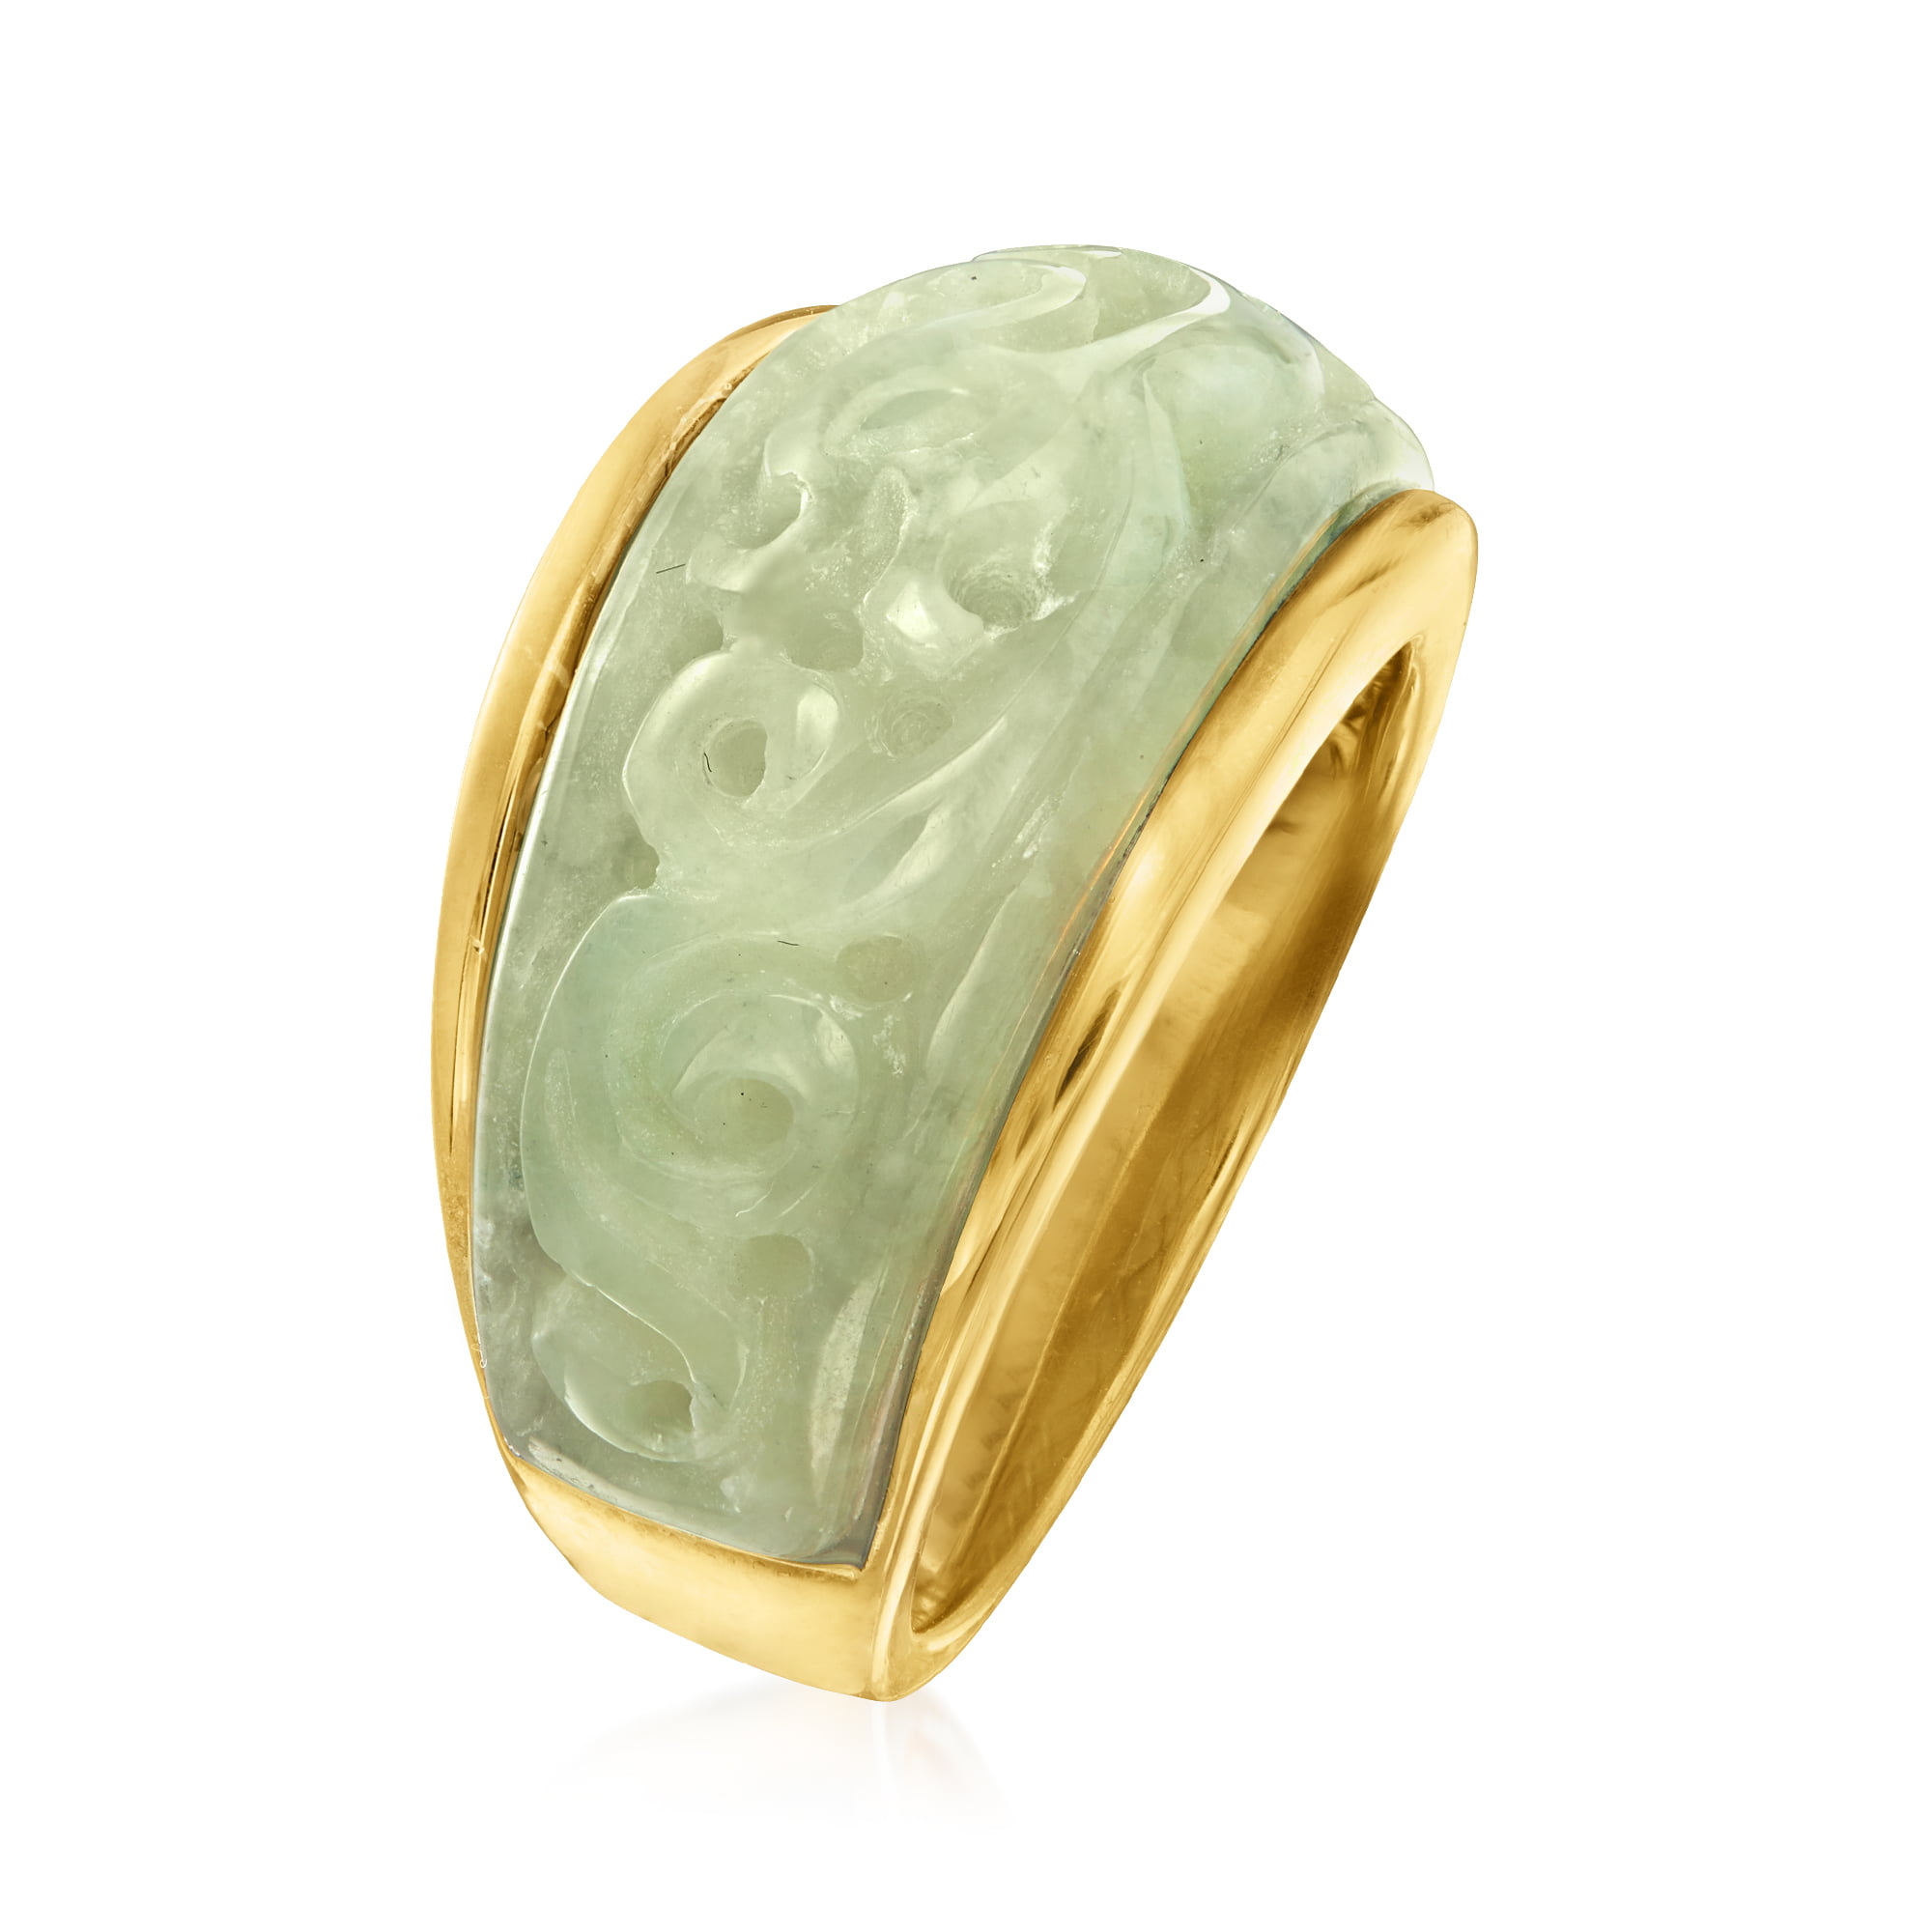 Ross-Simons Carved Jade Ring in 18kt Gold Over Sterling, Women's, Adult